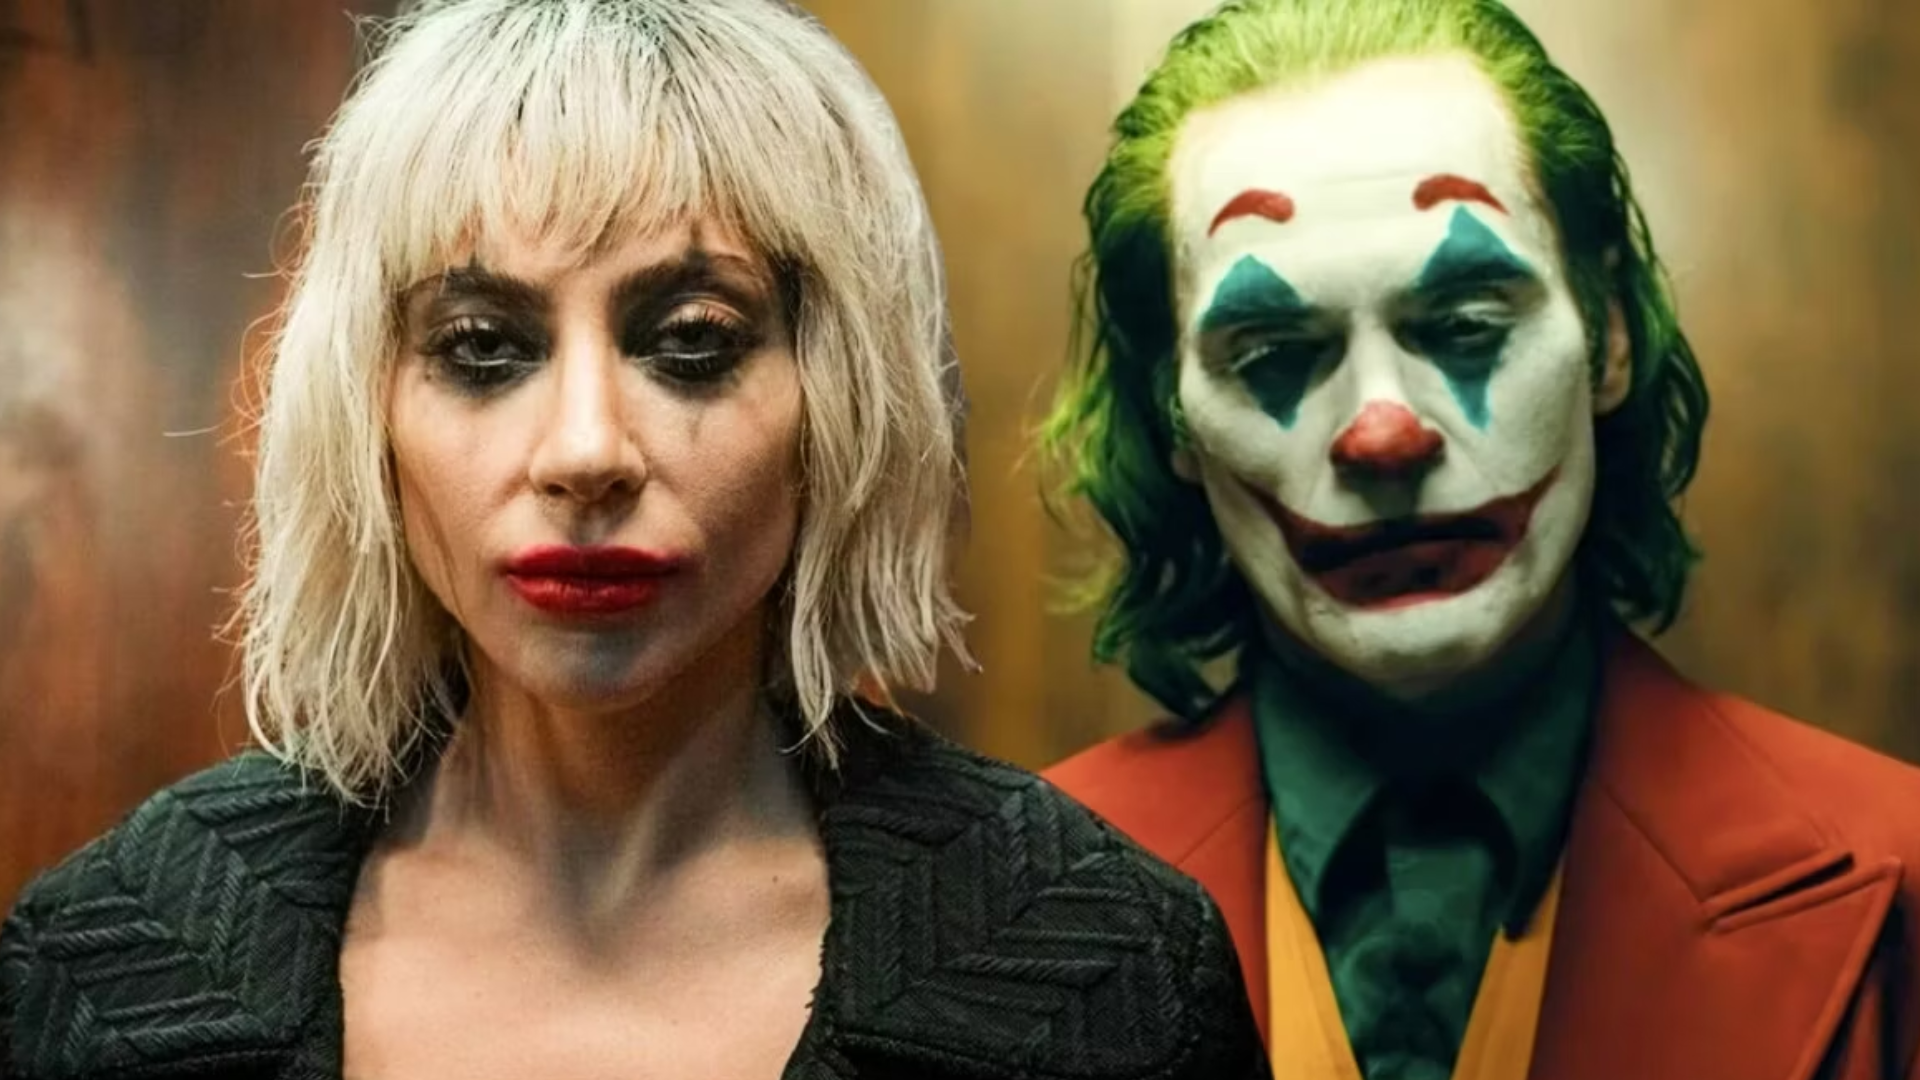 Joker 2 Trailer: Why Has YouTube Added A Viewer Discretion Warning For The Joaquin Phoenix’s Movie?